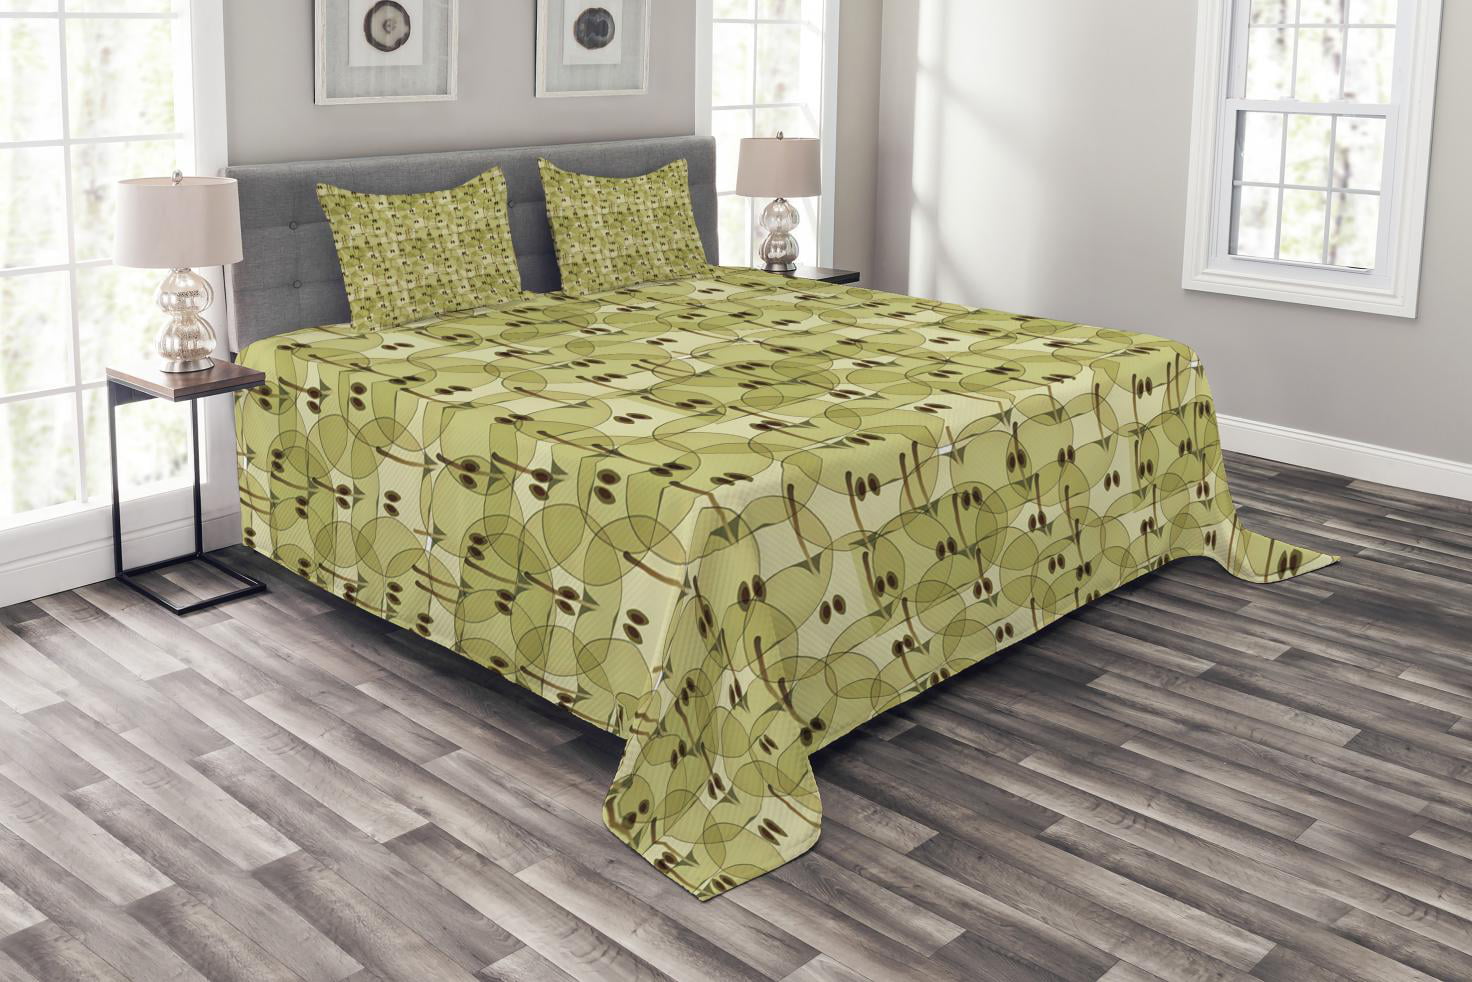 Abstract Autumn Garden Print Details about   Apple Quilted Bedspread & Pillow Shams Set 